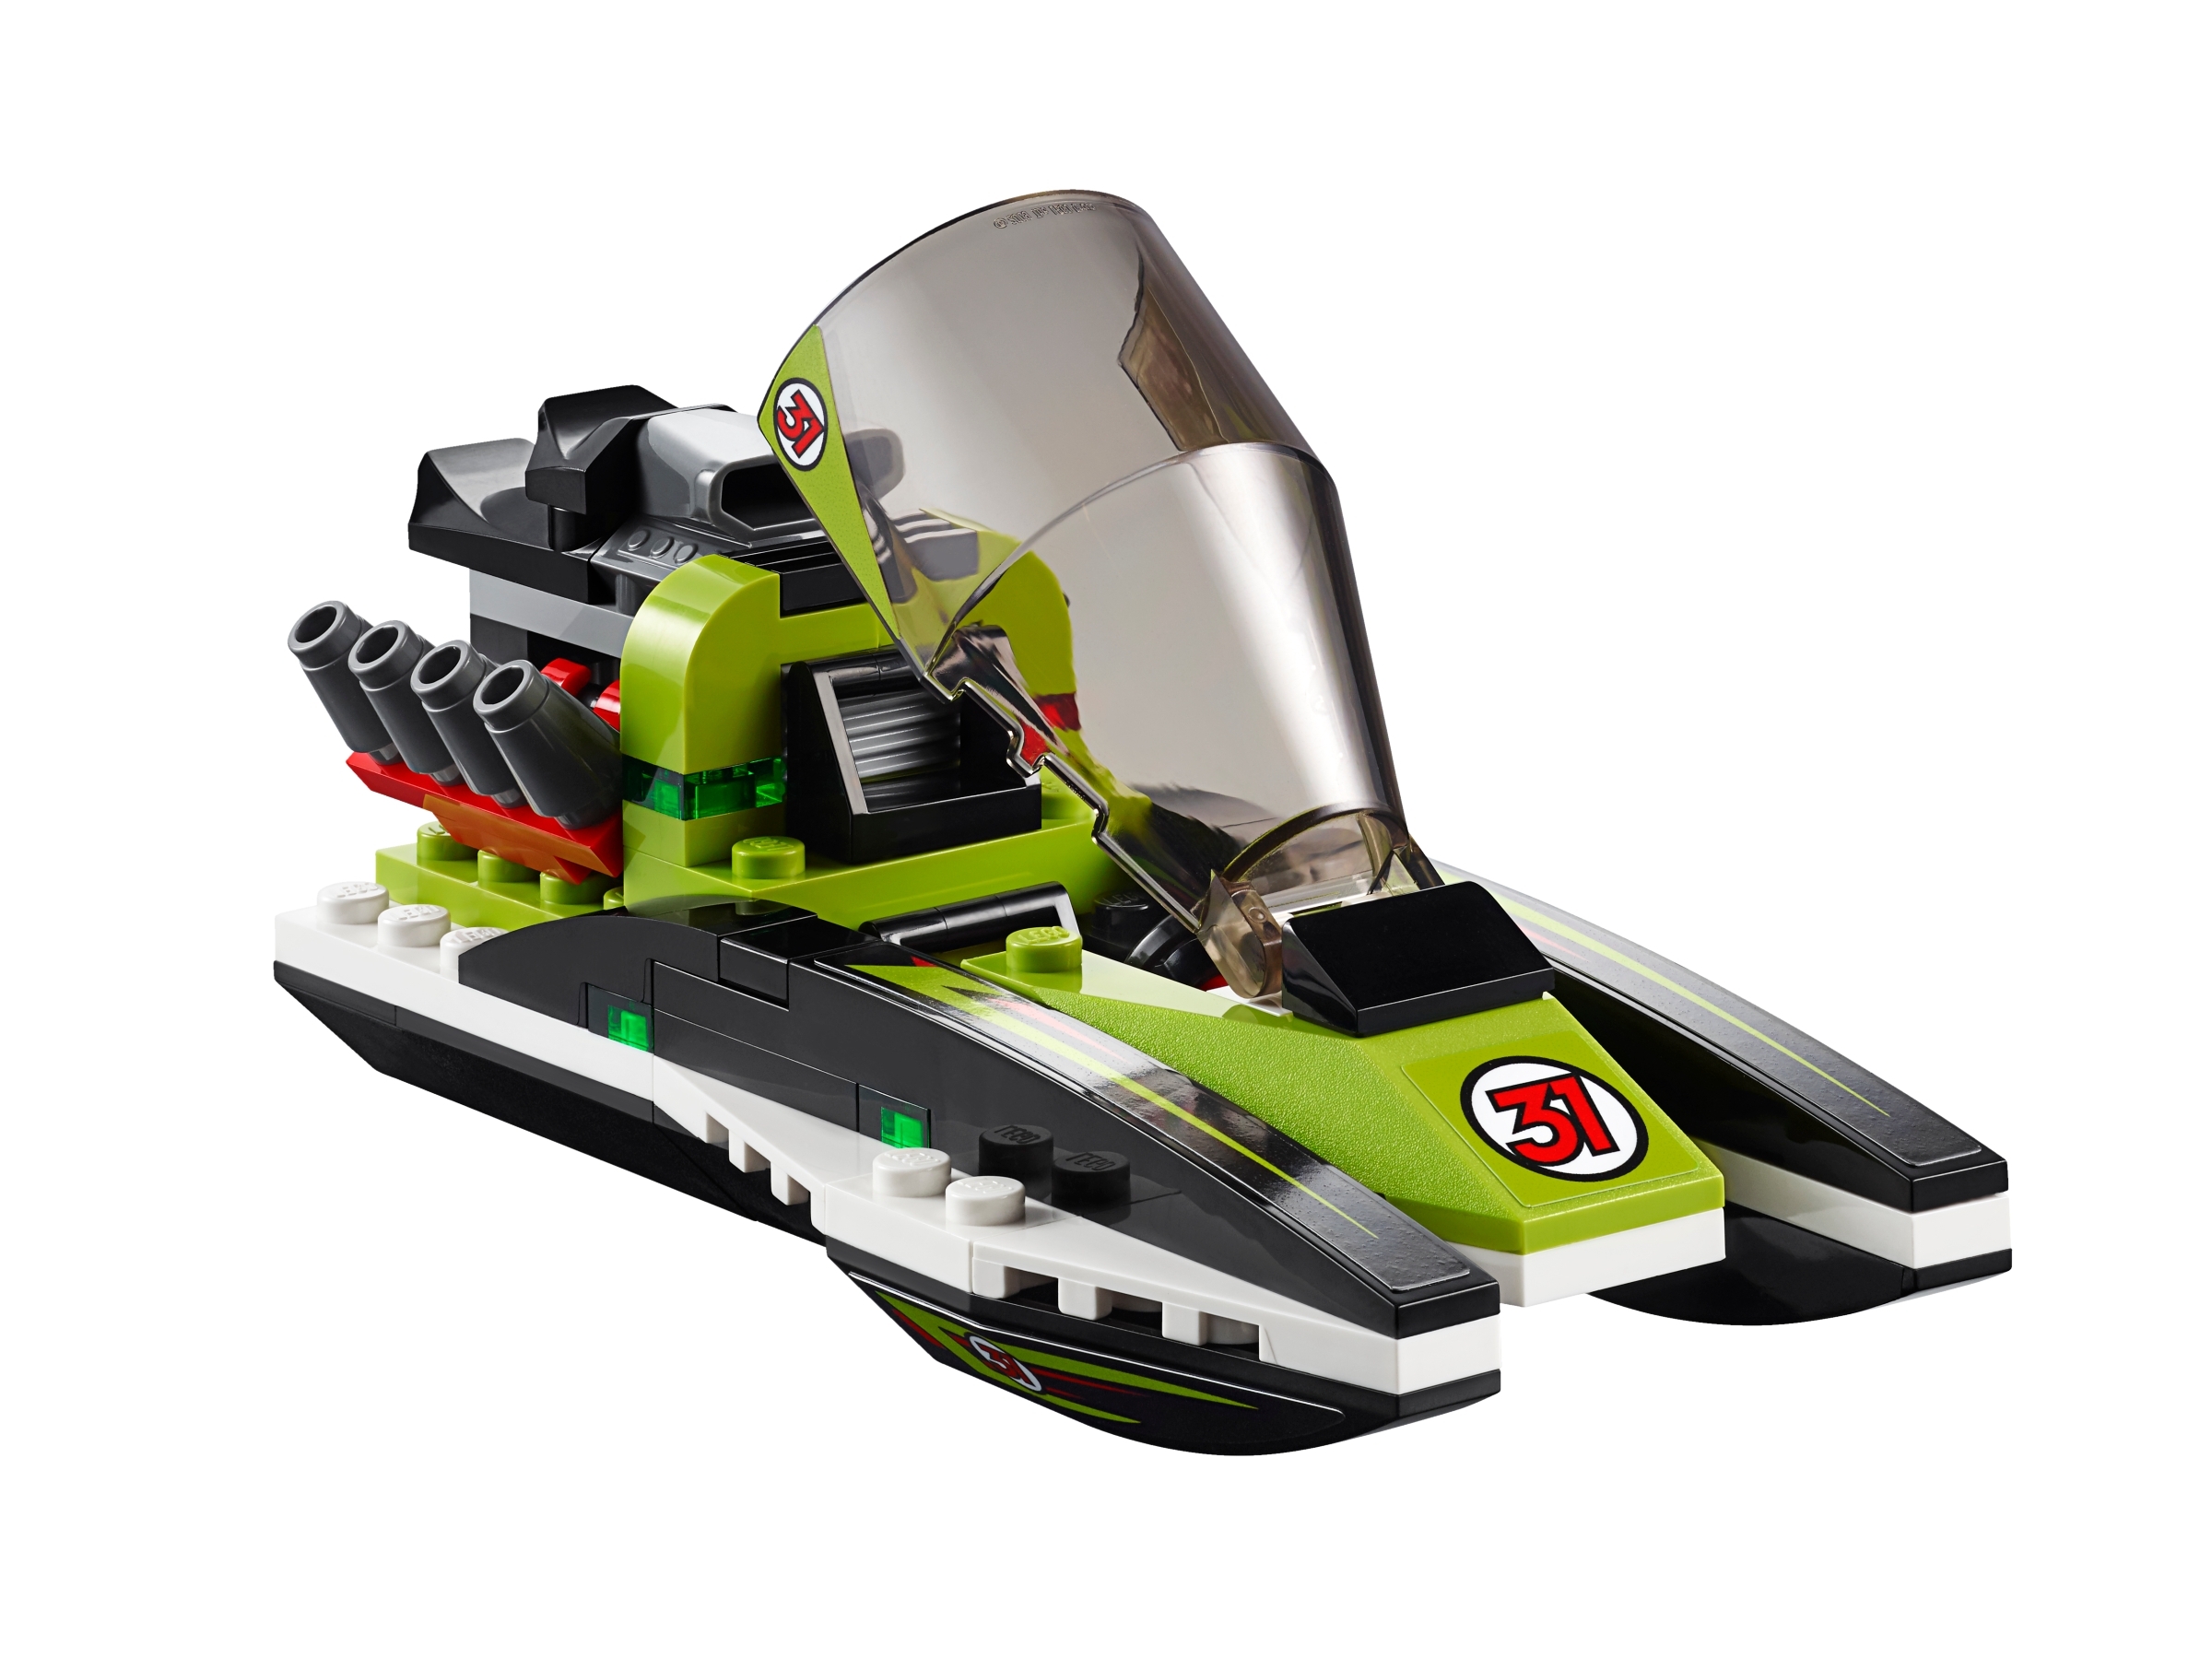 60114 LEGO City Race Boat for sale online 